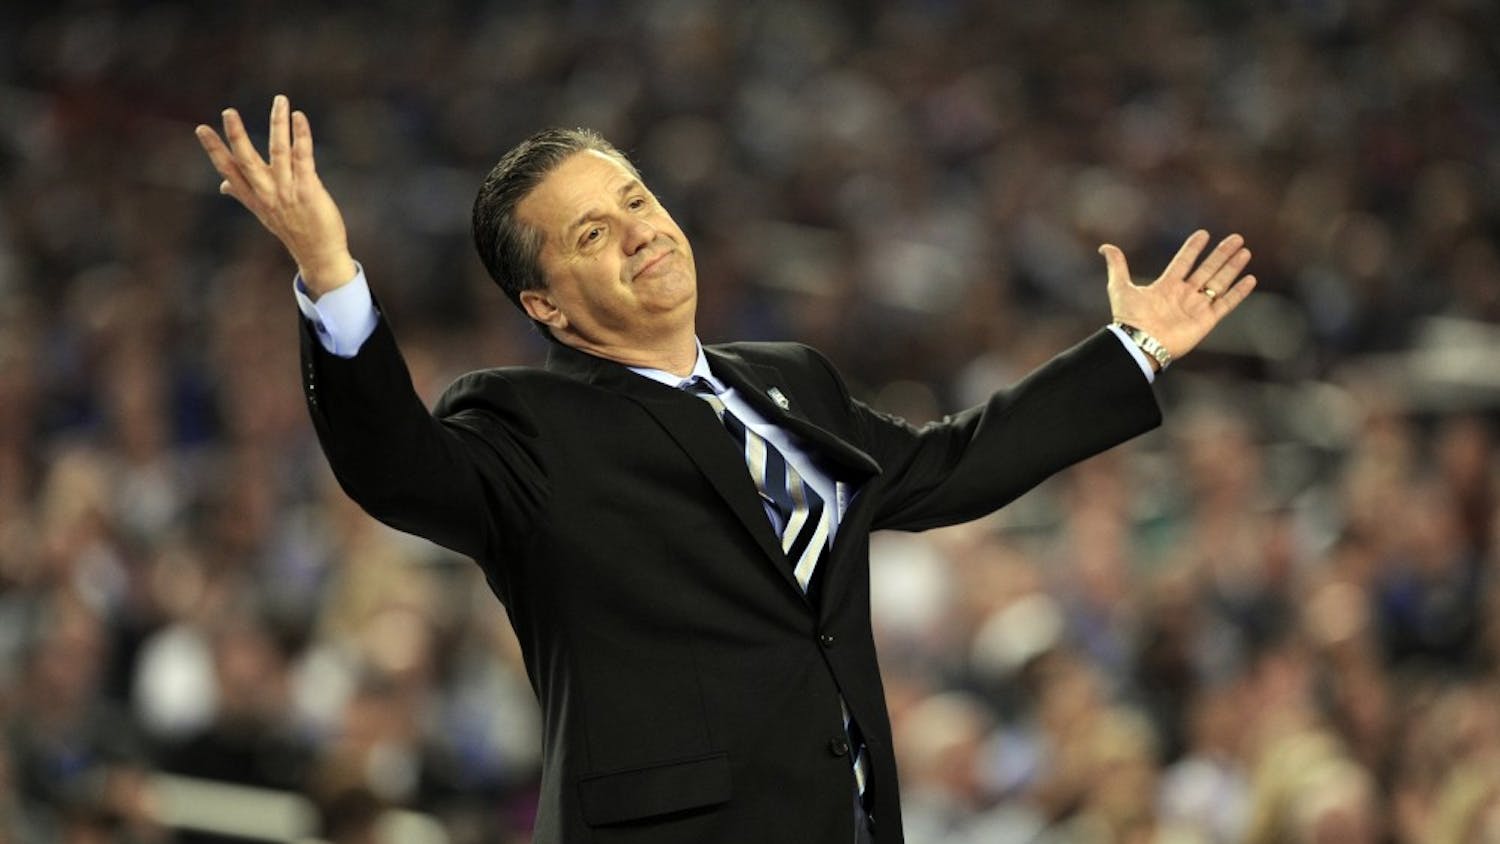 Kentucky coach John Calipari doesn't know what to do about UConn as the Connecticut Huskies beat the Kentucky Wildcats 60-54 in the NCAA Final Four championship game at AT&T Stadium in Arlington, Texas, Monday, April 7, 2014. (Stephen Dunn/Hartford Courant/MCT)